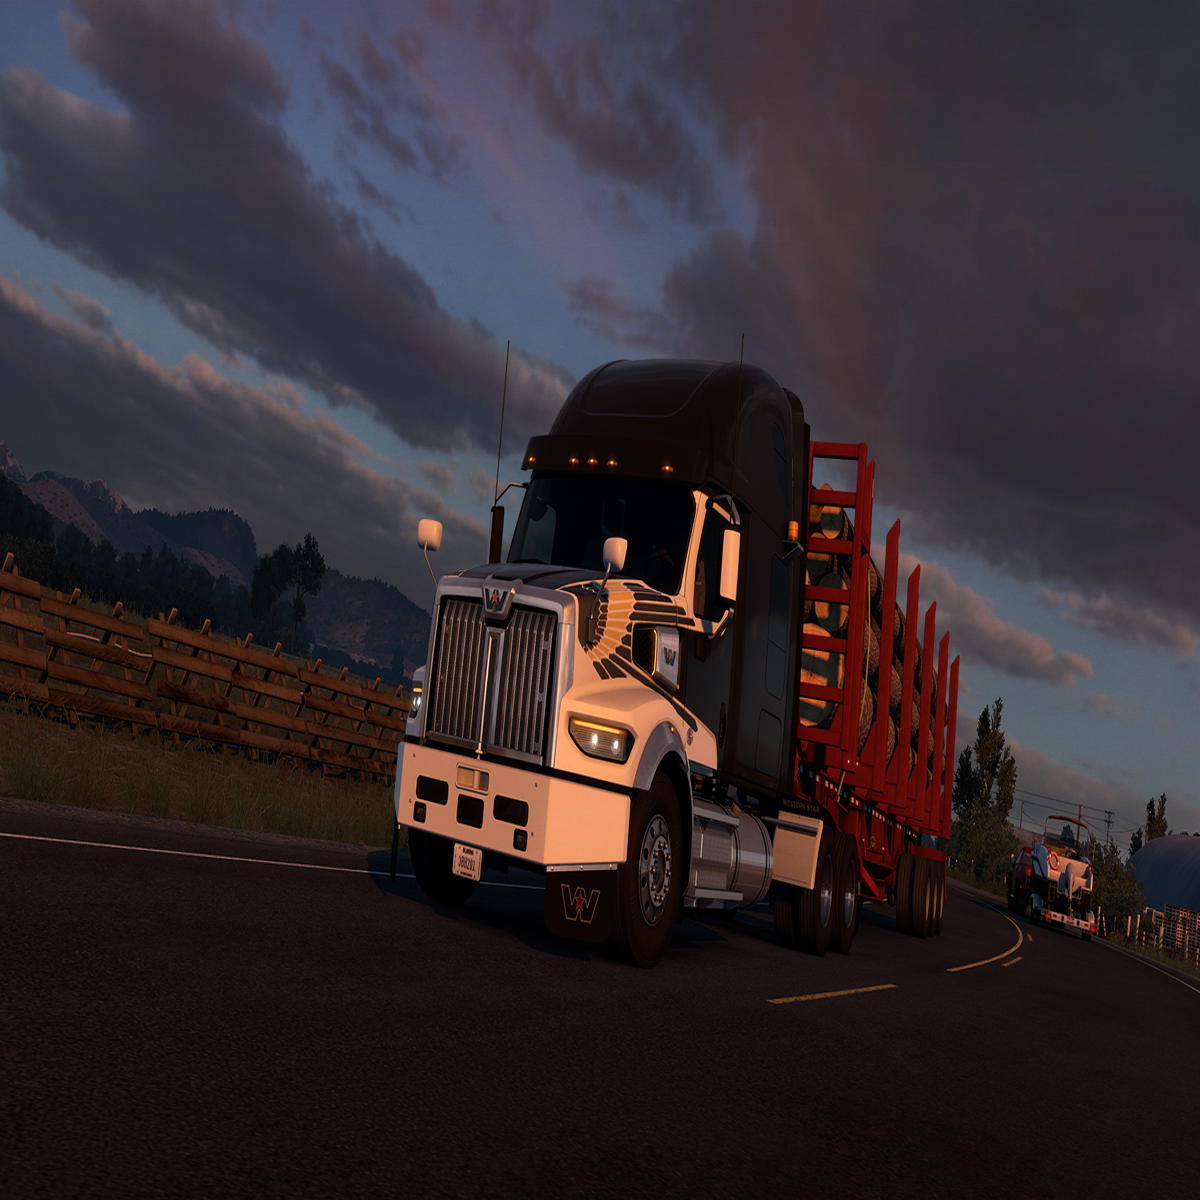 American Truck Simulator's latest update adds (back) the Moon